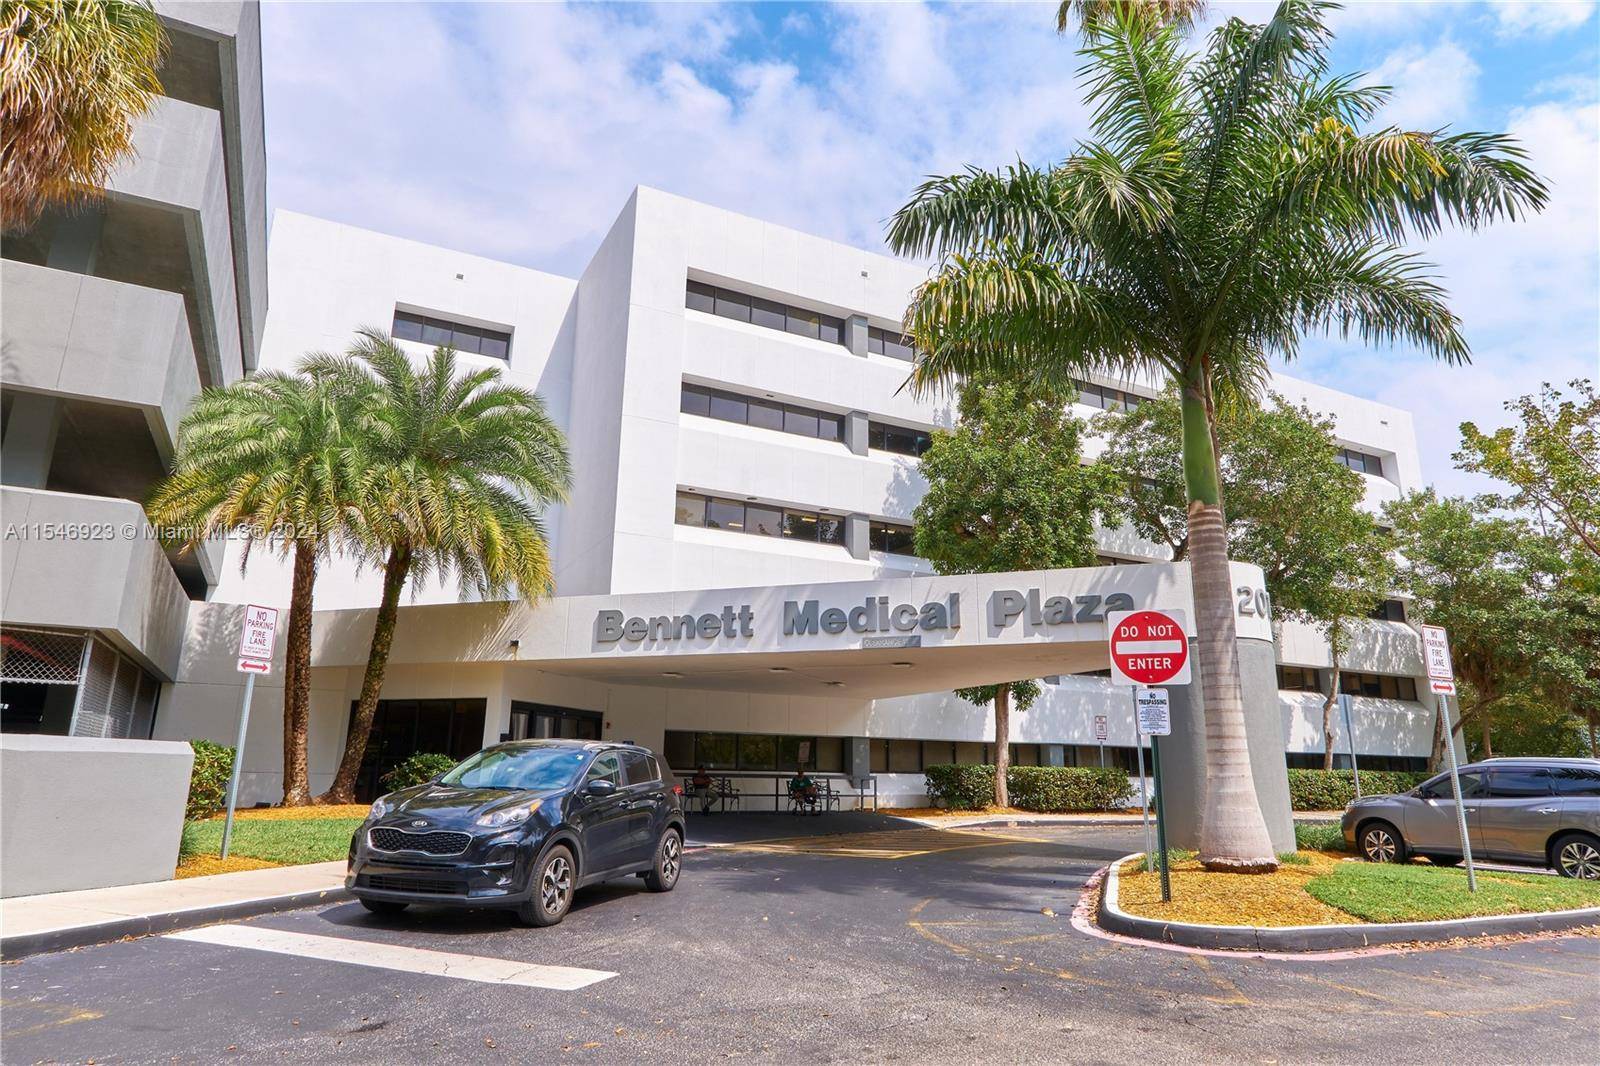 The medical office is situated on the Bennett Medical Plaza, which is located behind Plantation General Hospital.